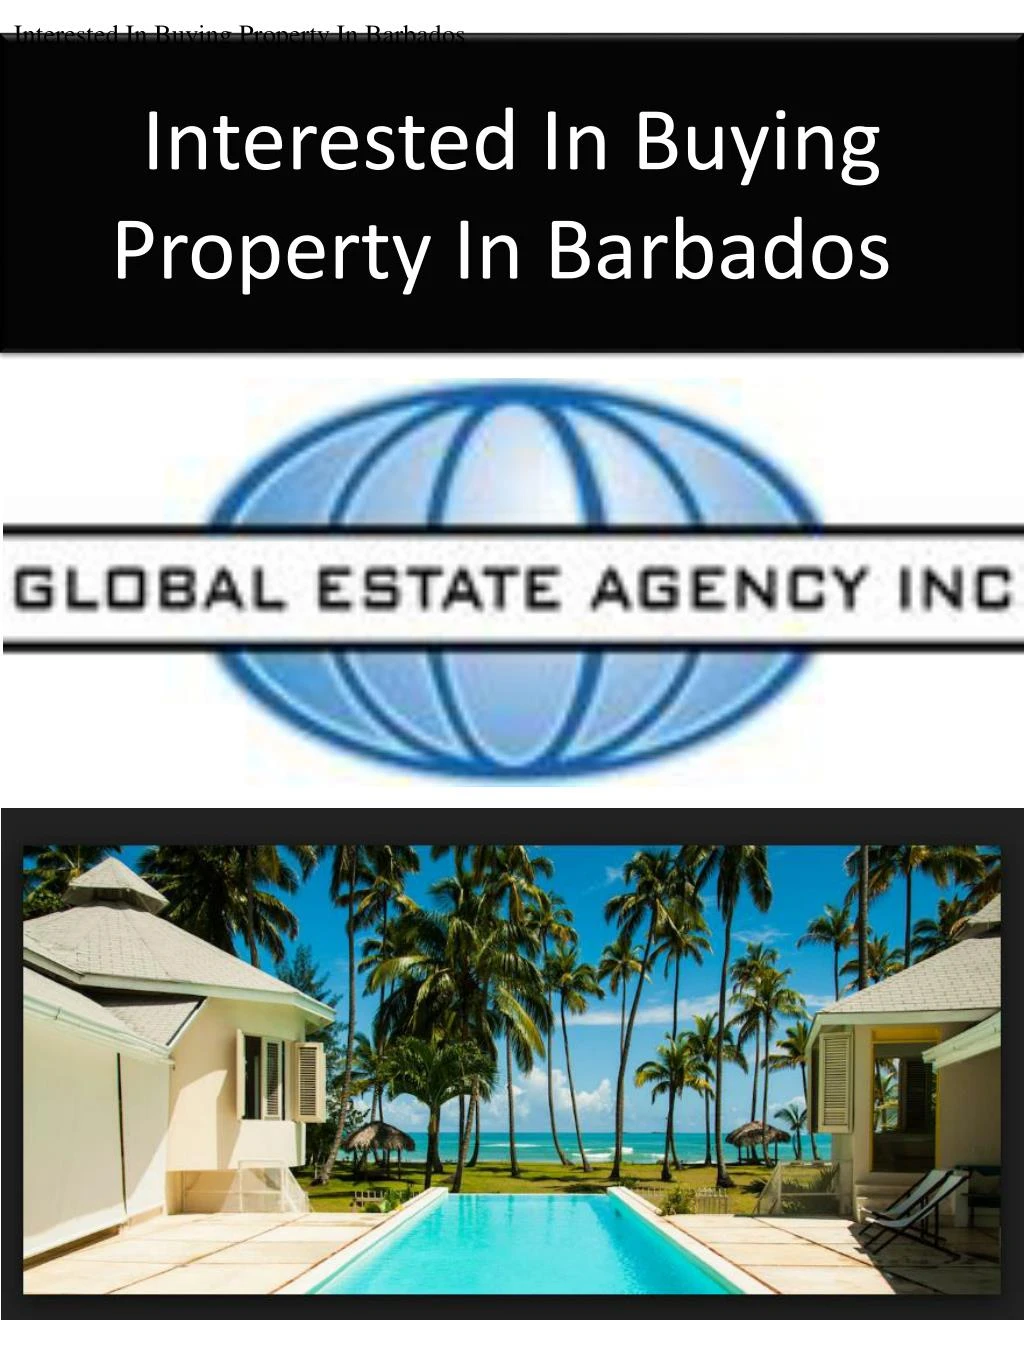 interested in buying property in barbados